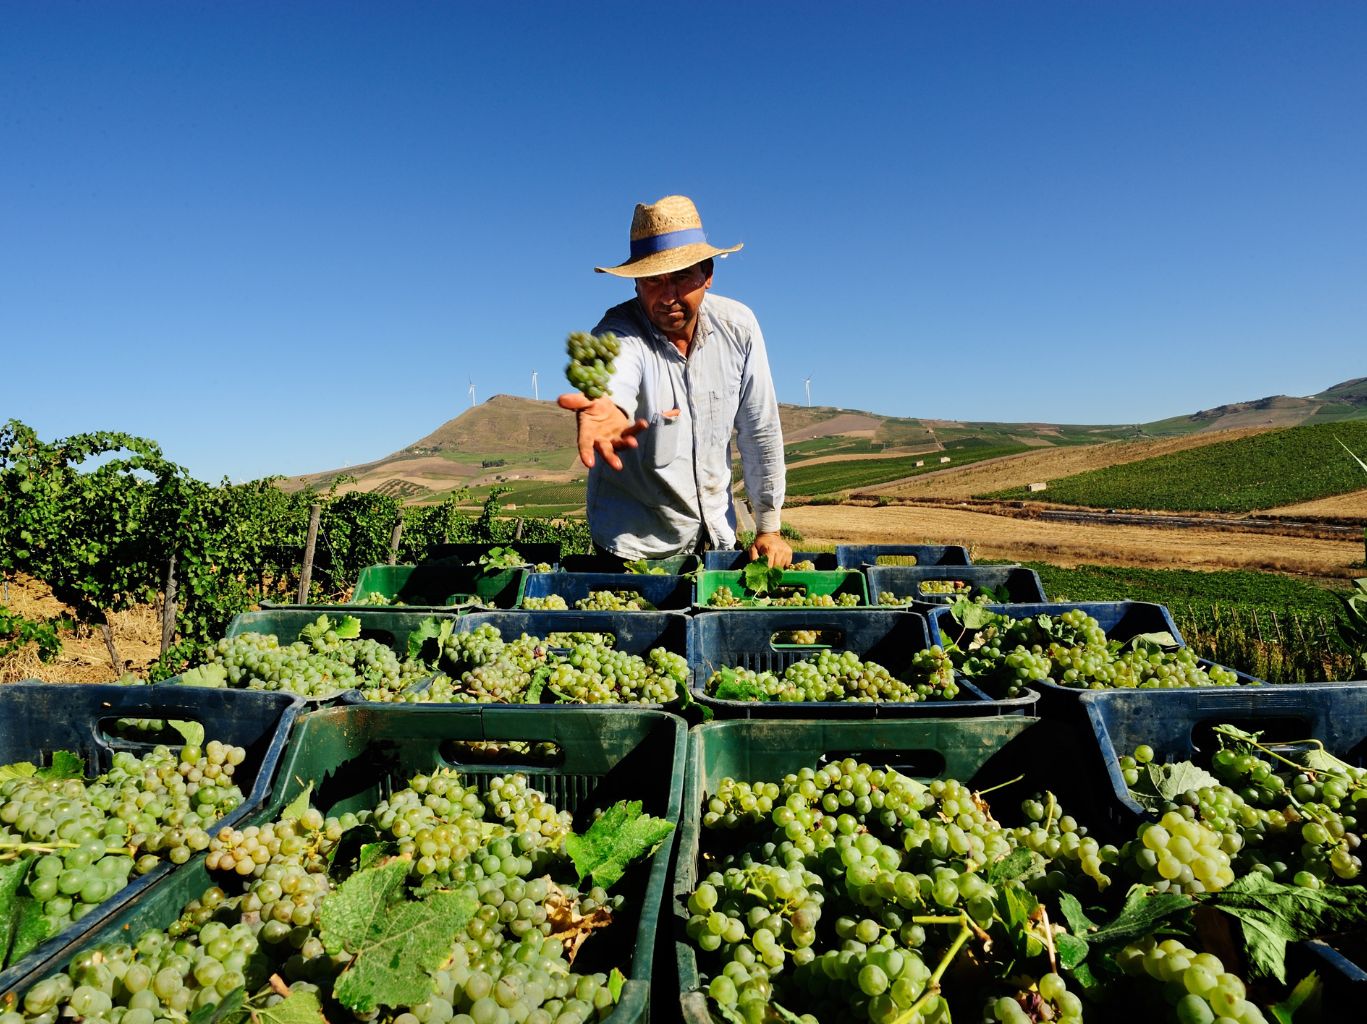 Why choose Organic wine? A Q&A with Sicilian Winery Cantine Rallo